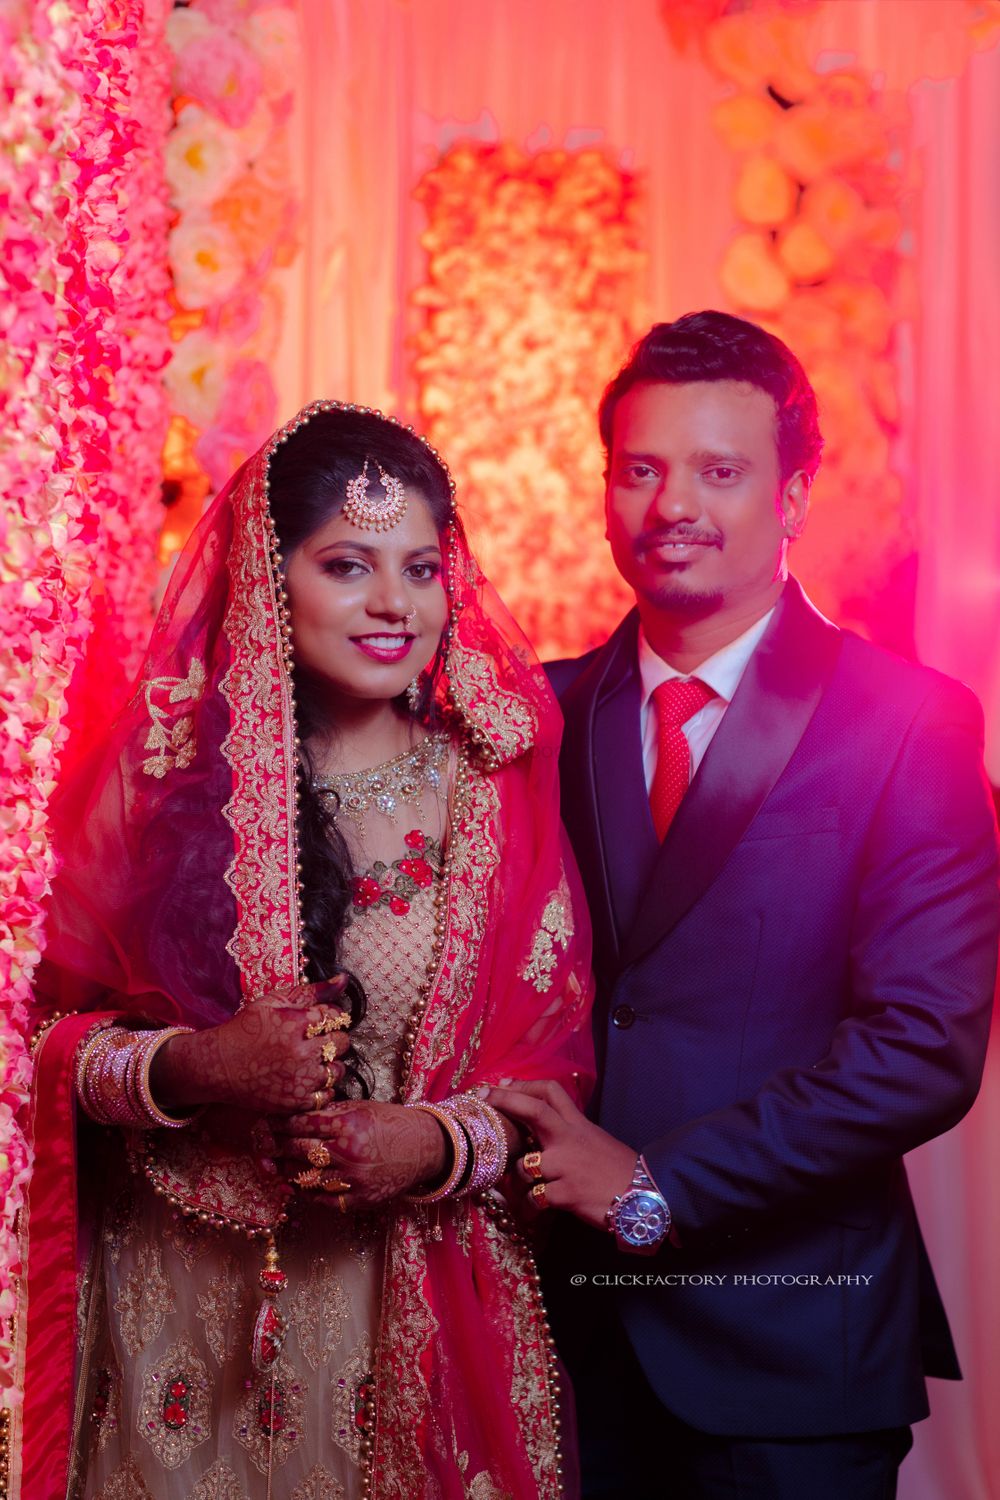 Photo From PREM & CHANDINI - By Click factory photography